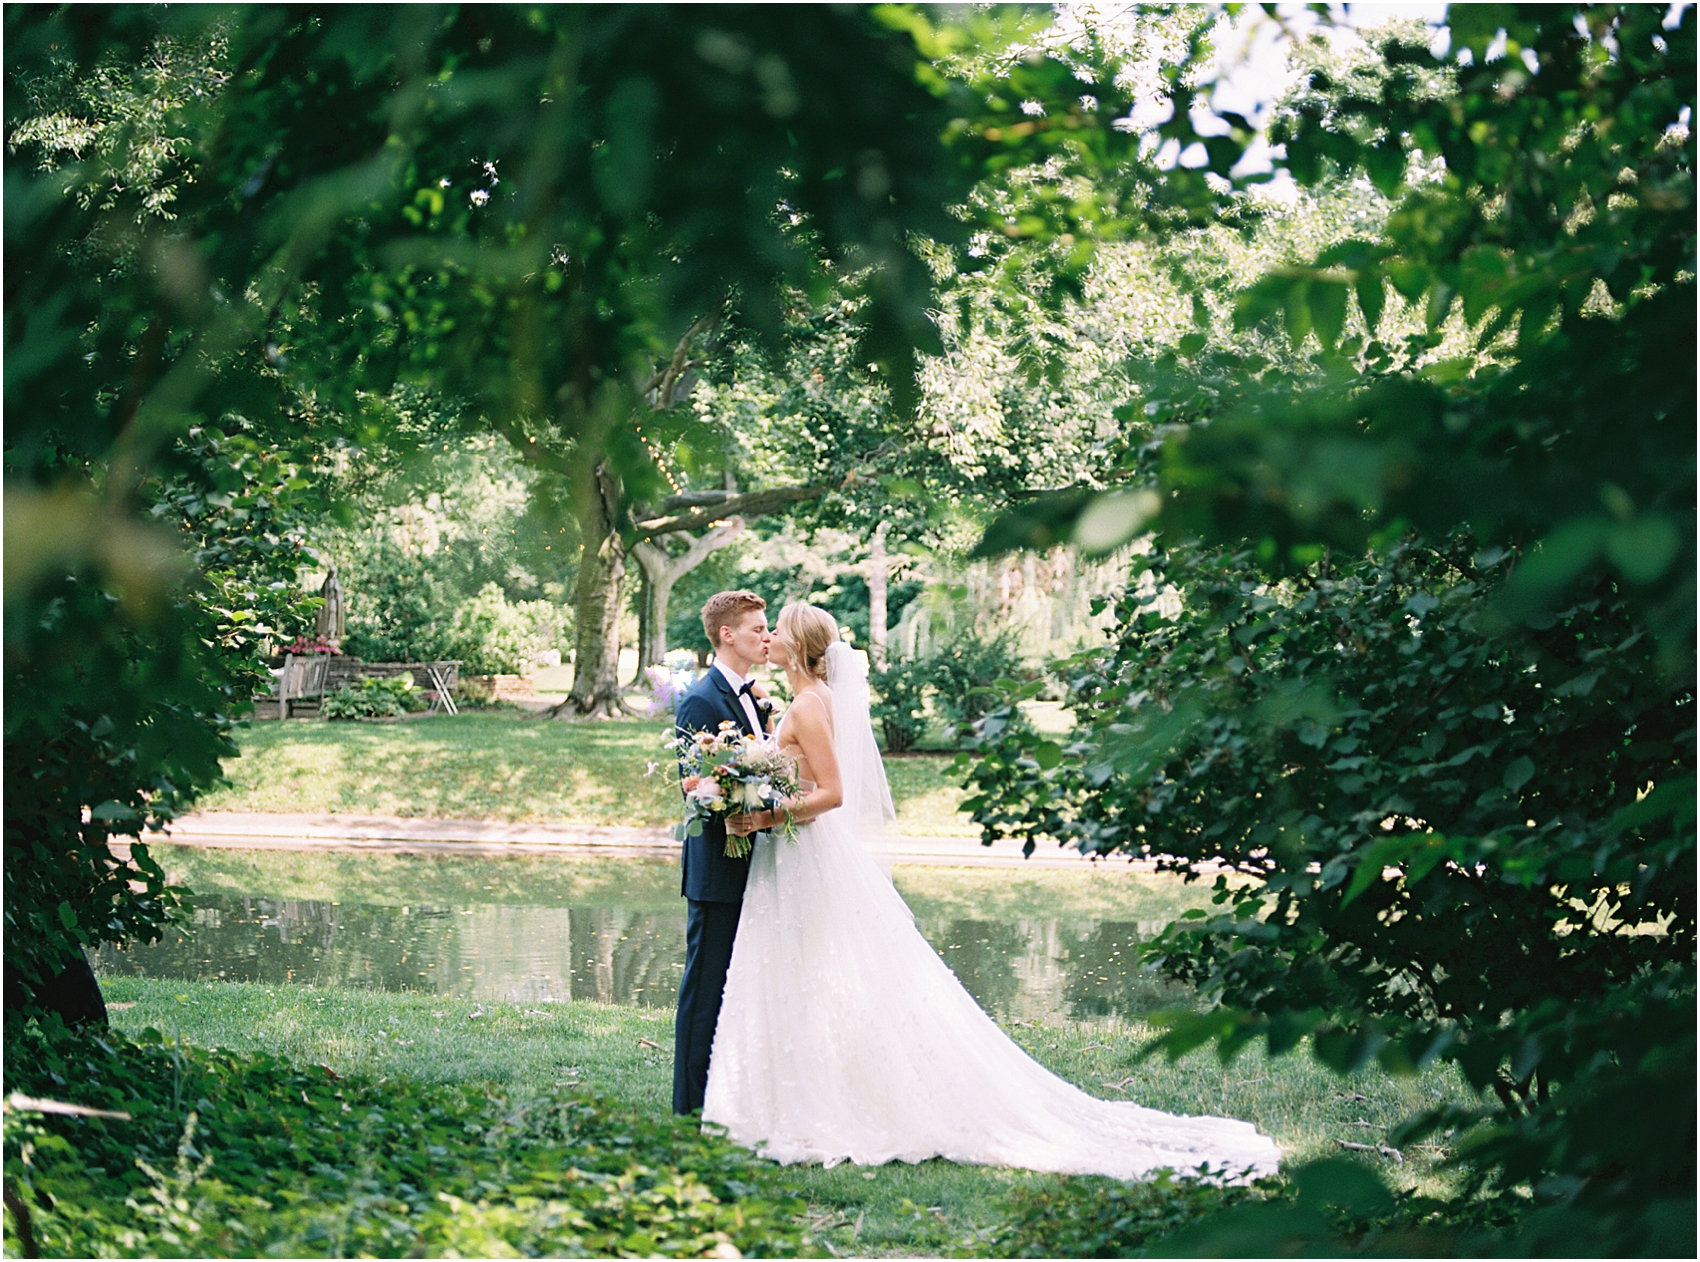 Mary Claire and Jack kiss in the garden at Saint Marys College on their wedding day photo by Cynthia Mae Photography Notre Dame Wedding Photographer